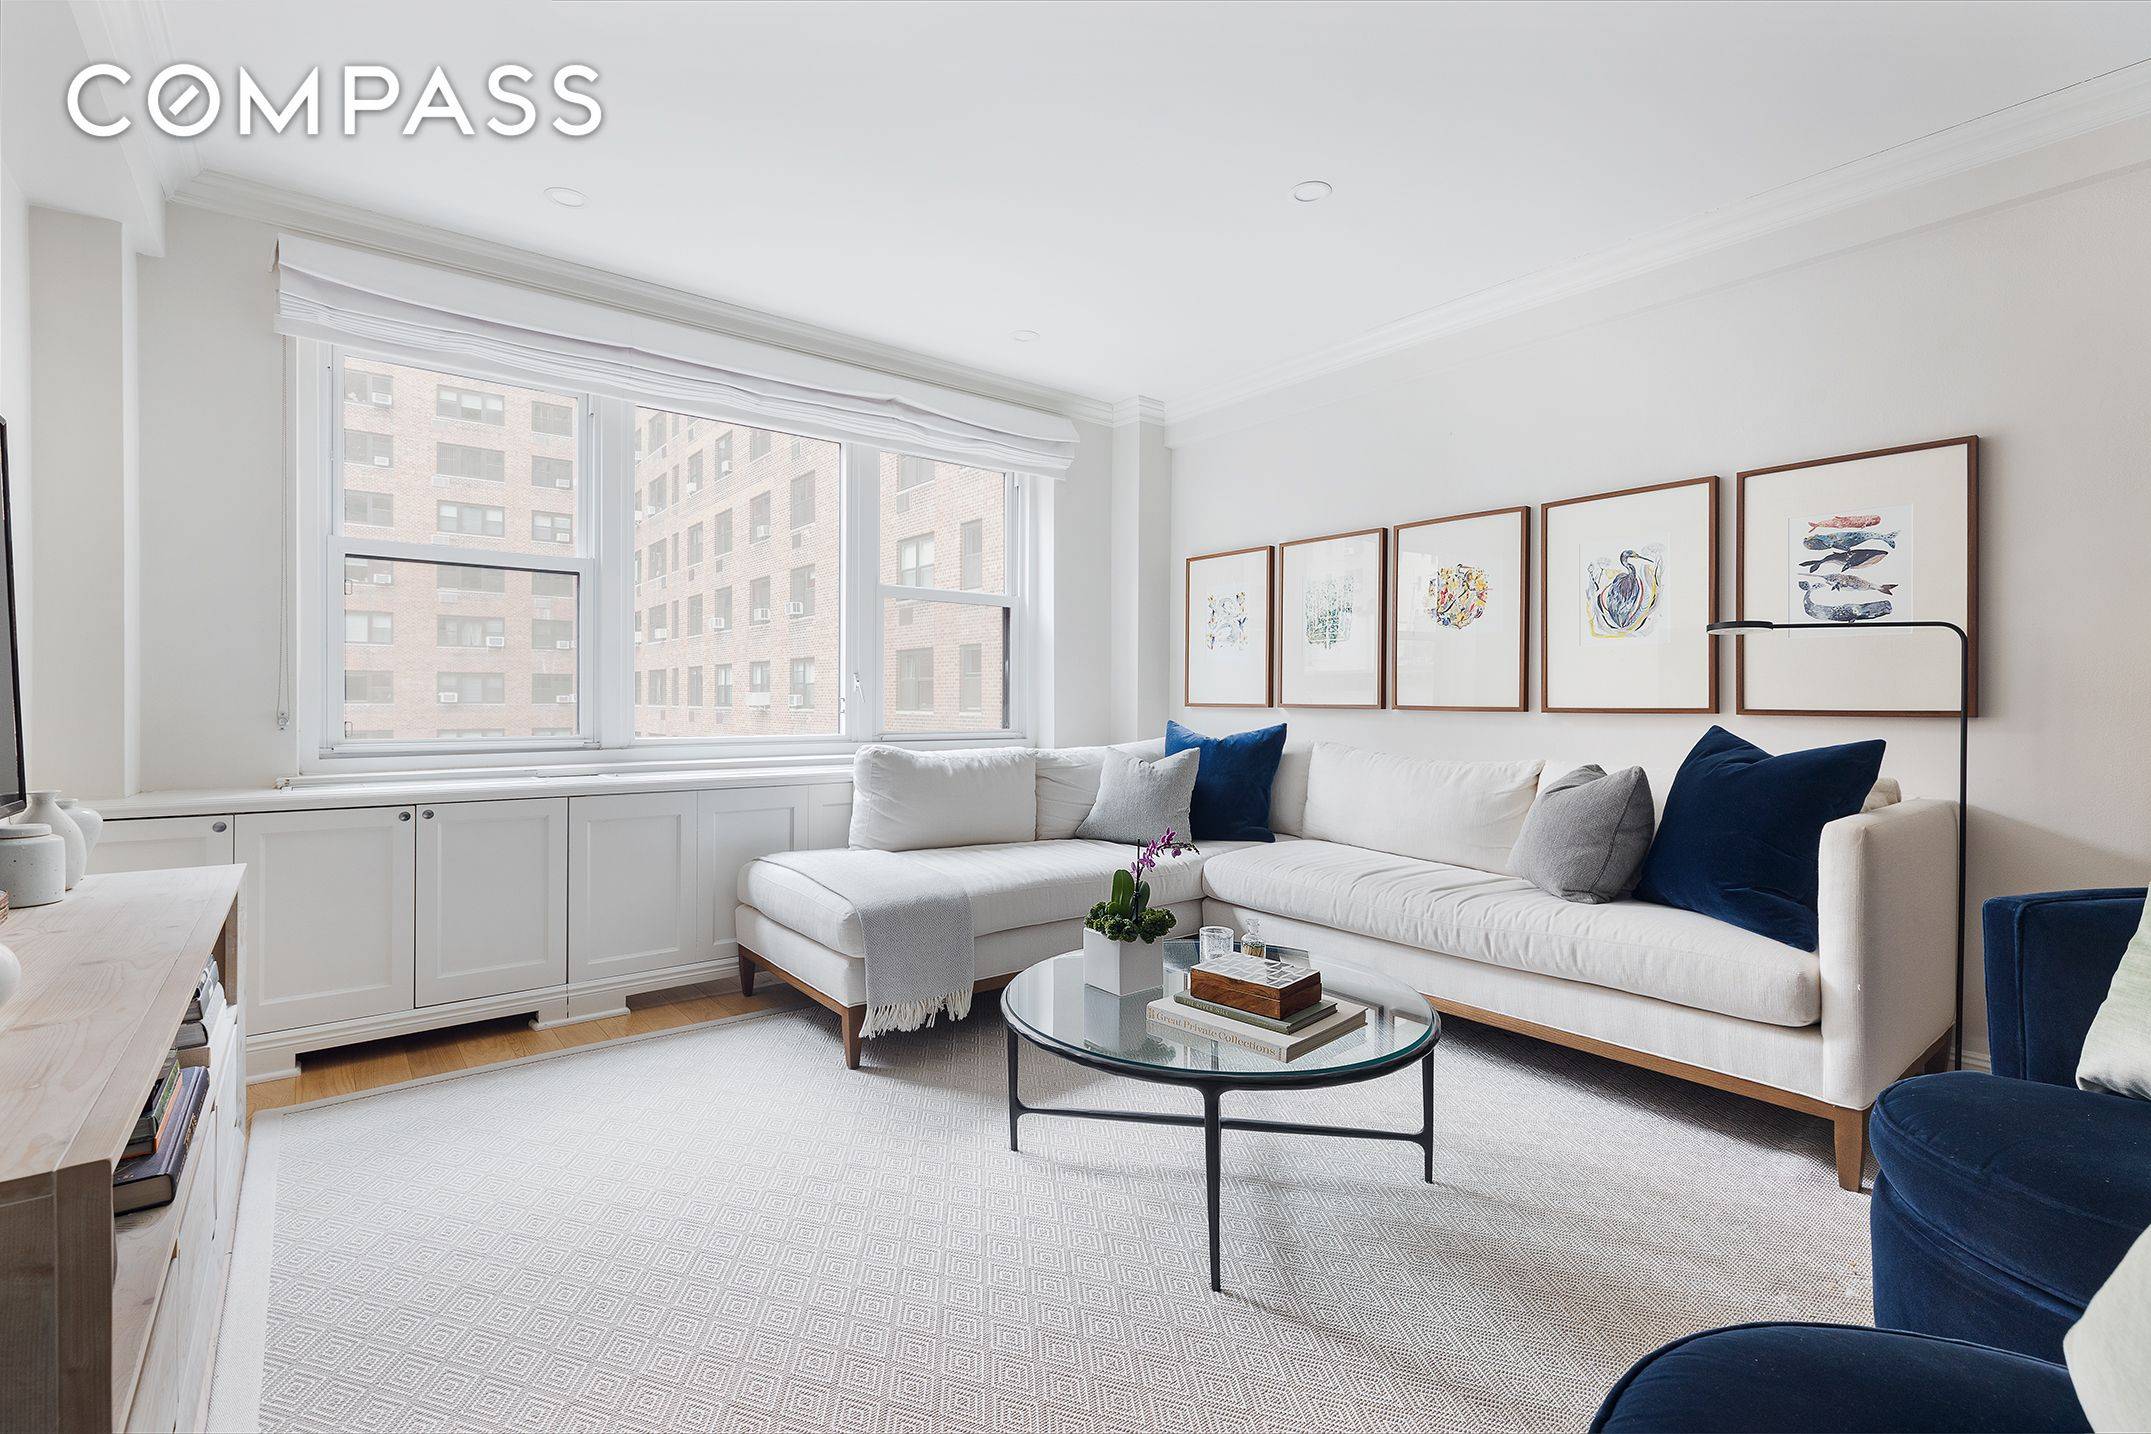 Welcome to this sunny and spacious 2 bedroom, 2 bathroom corner apartment situated in the Upper West Side s Schwab House, previously a full block mansion that was at one ...